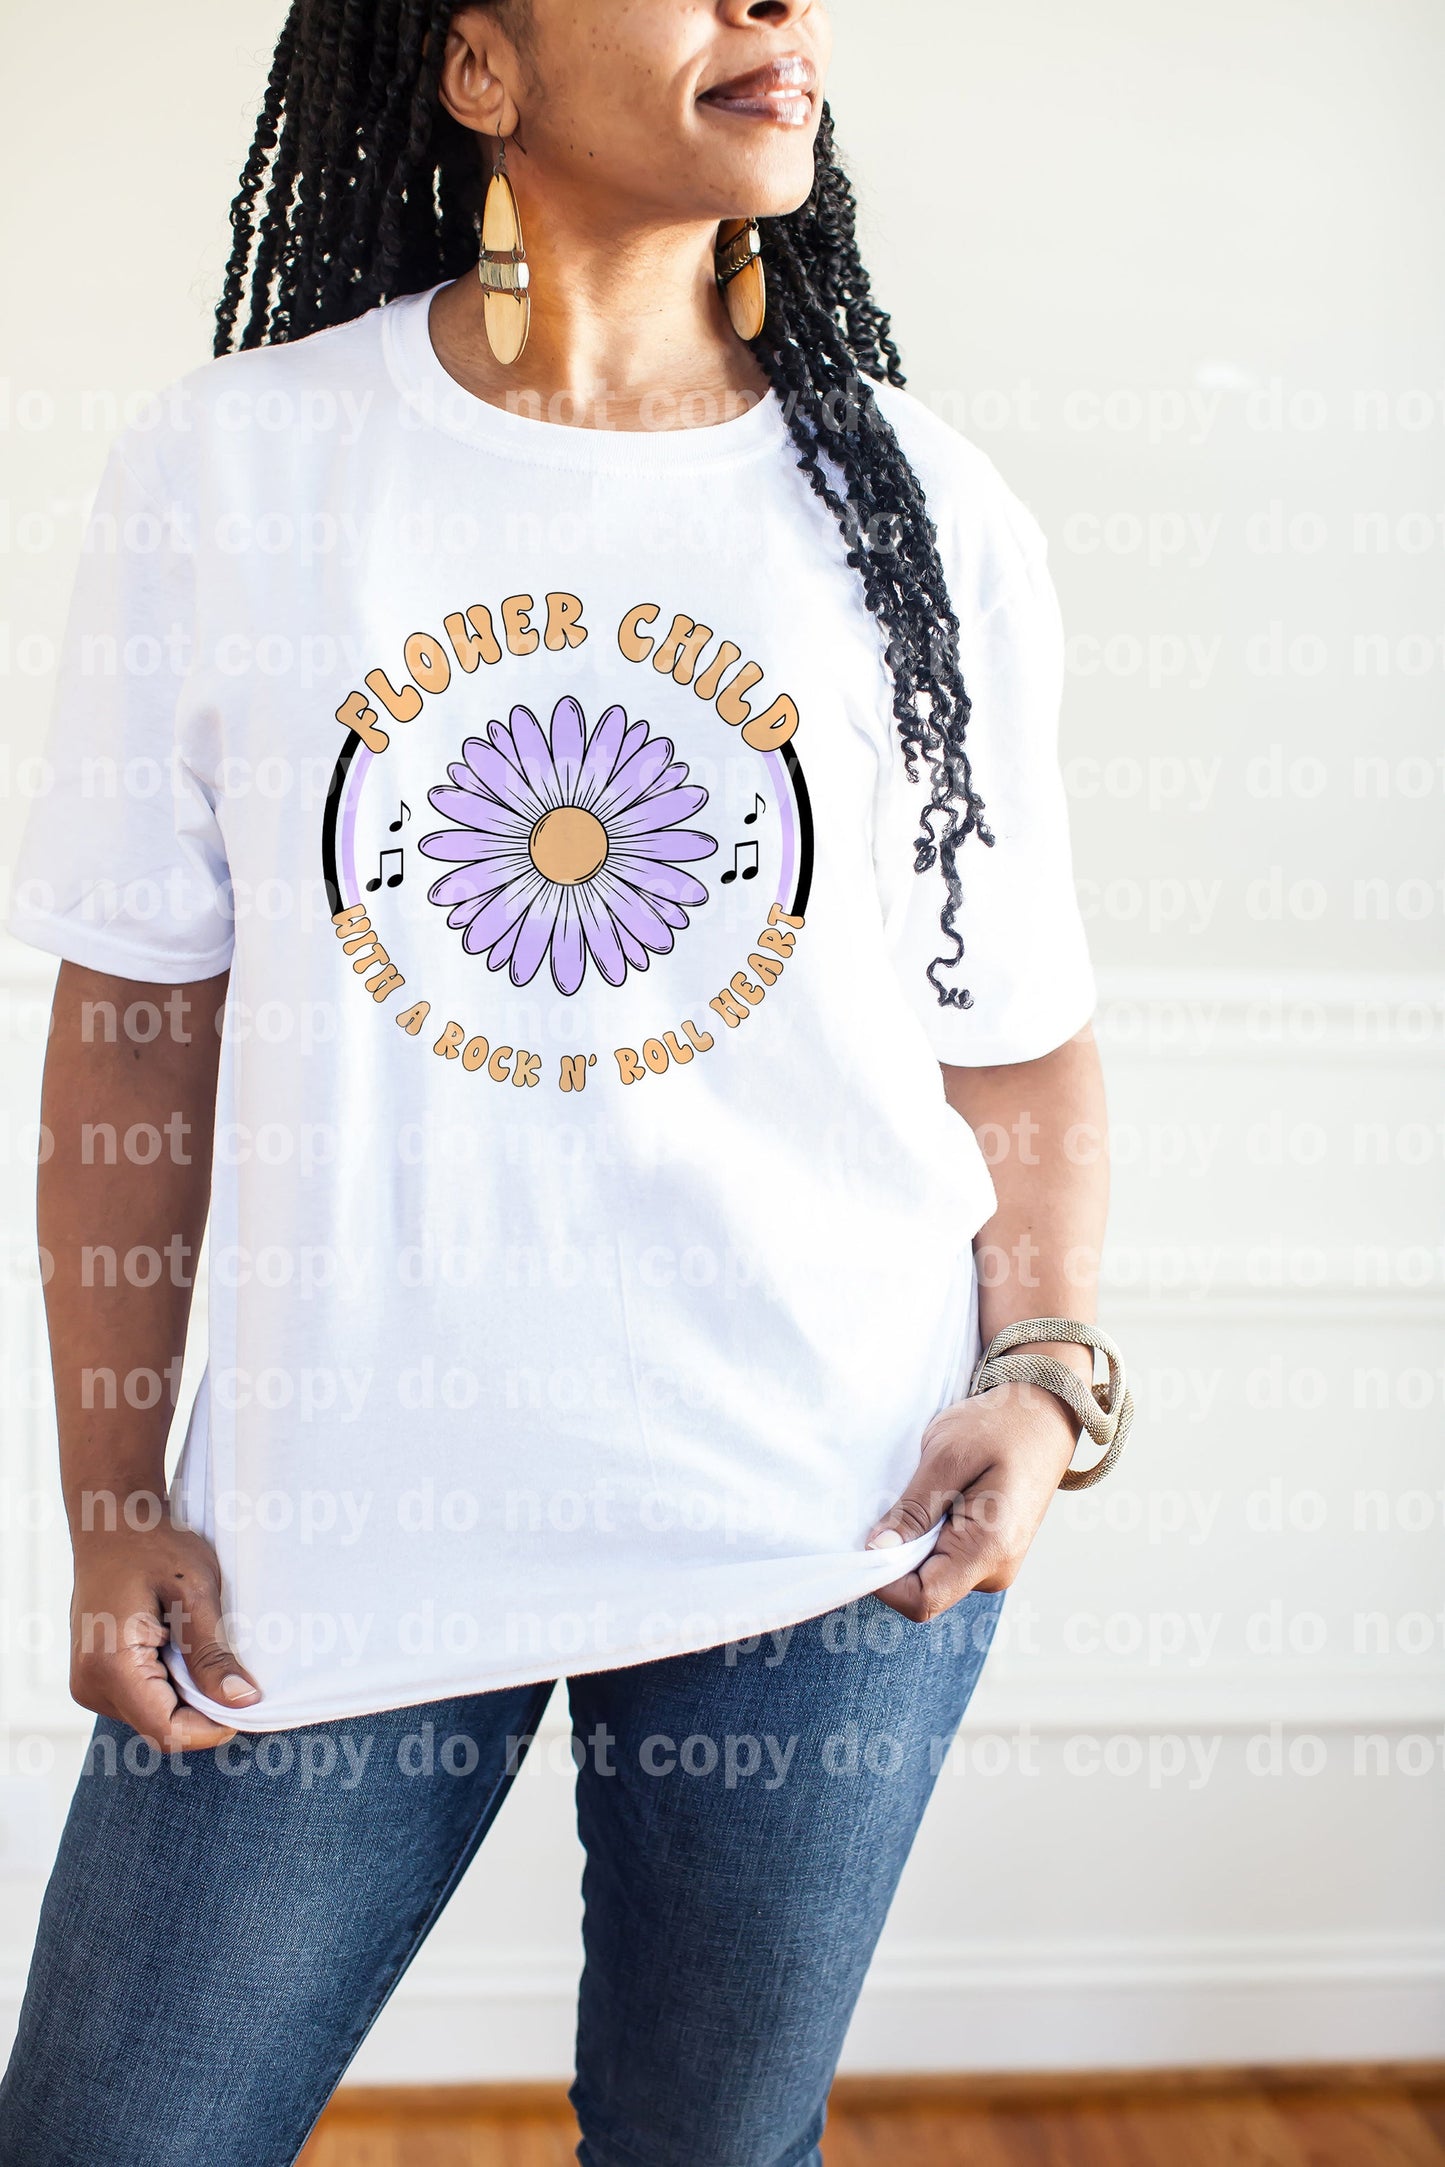 Flower Child With A Rock N Roll Heart Full Color/One Color Dream Print or Sublimation Print